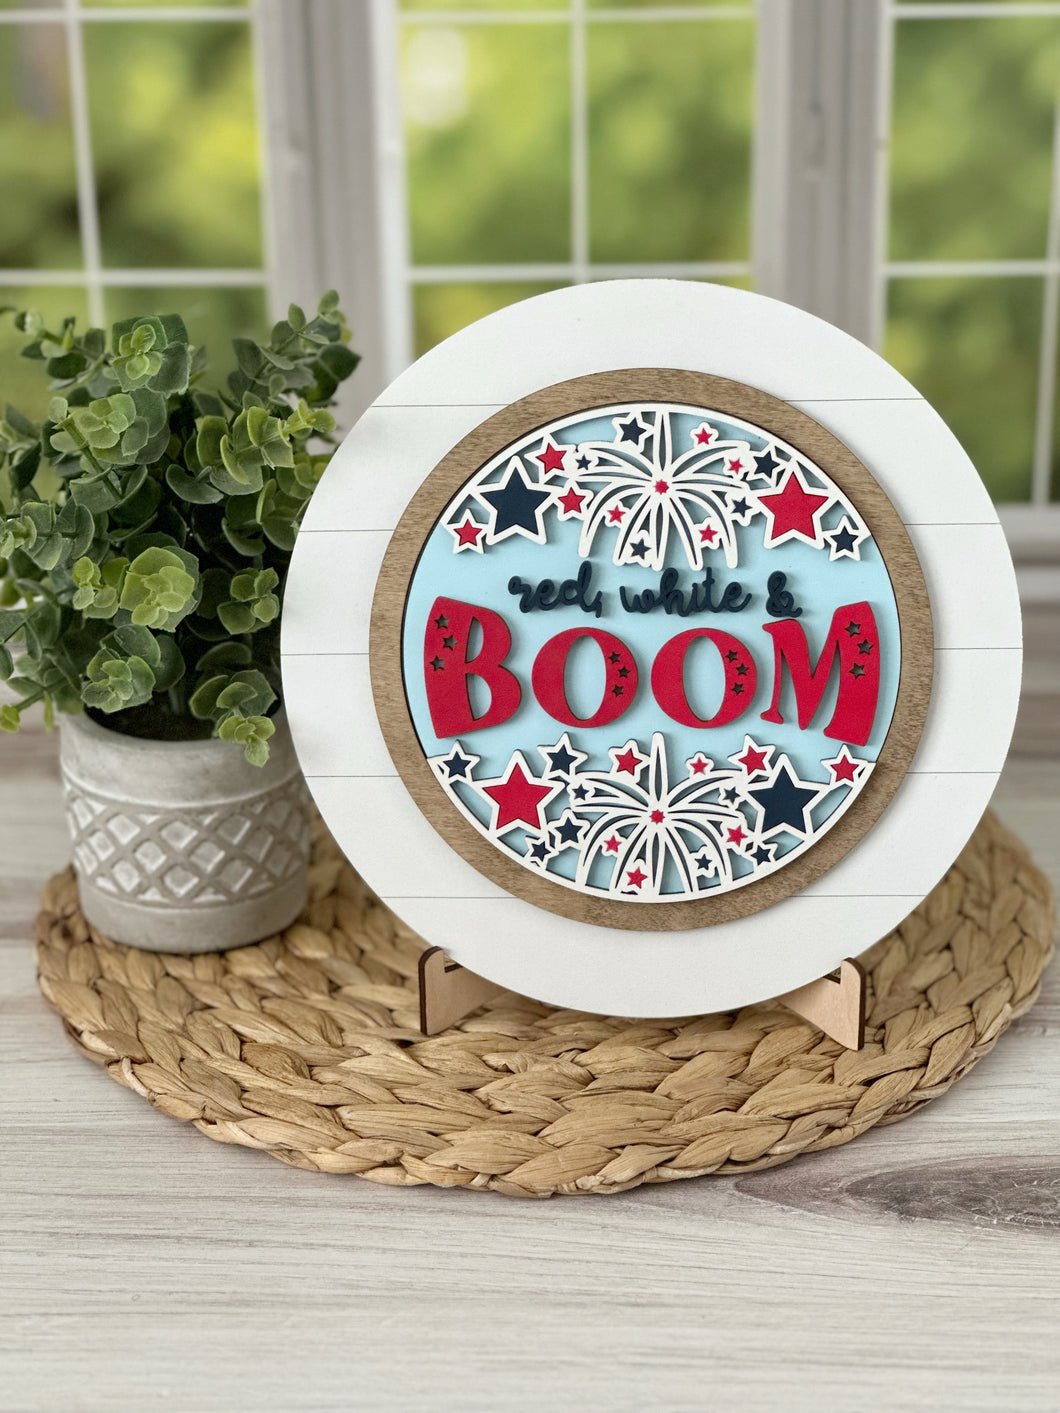 Red, White and Boom Insert, July 4th Decor